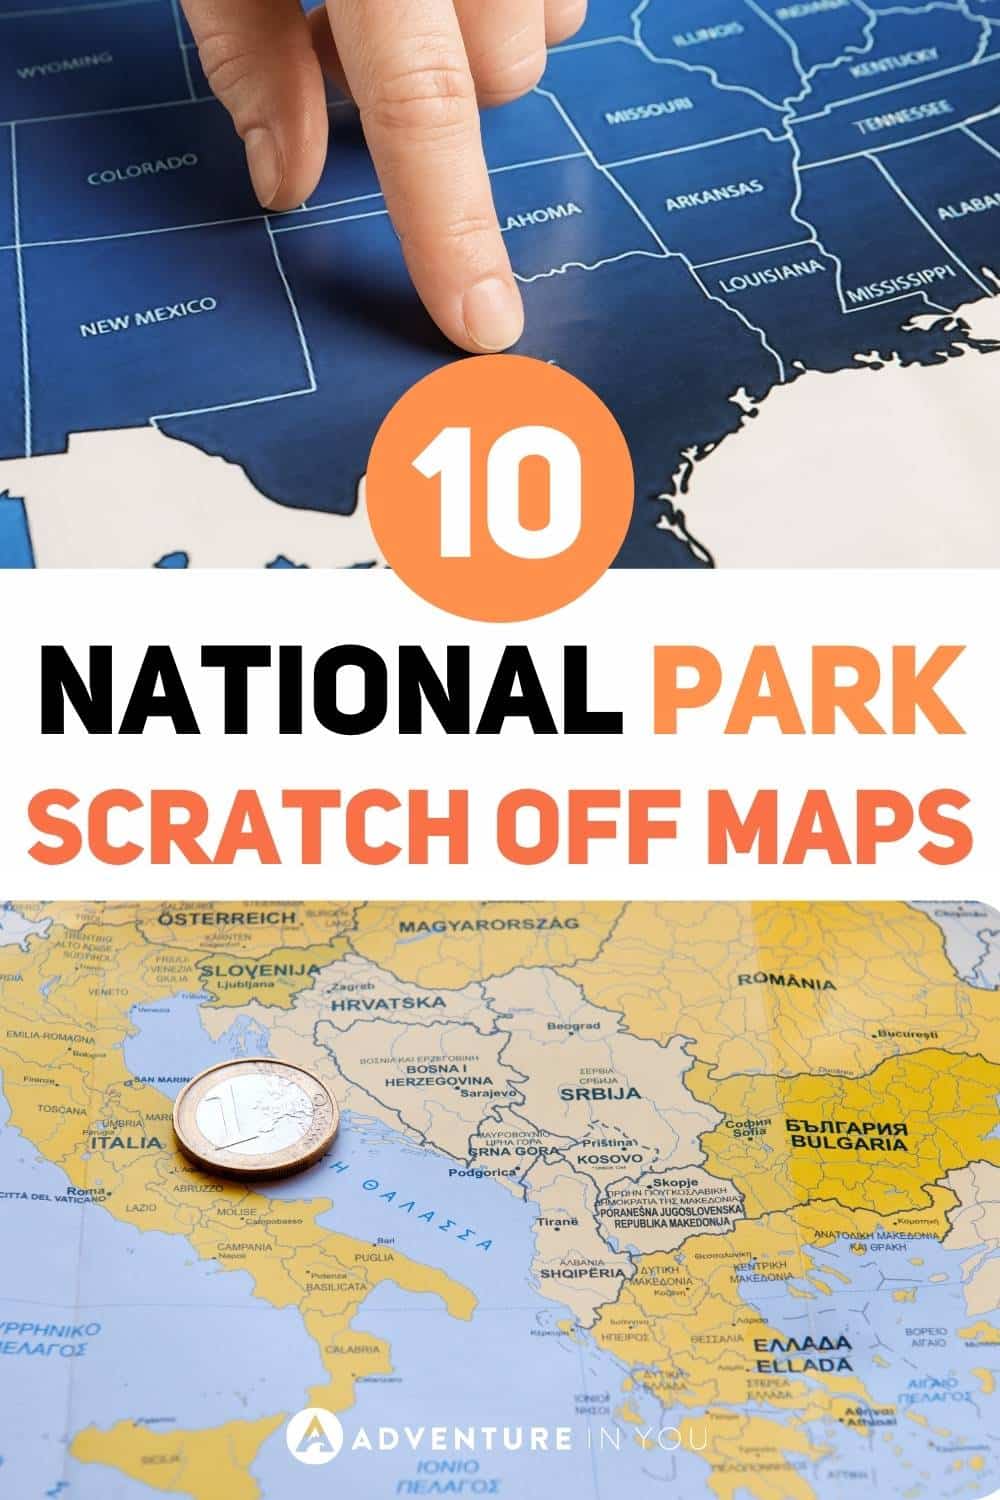 National Park Scratch Off Maps | Looking for something to show off your adventure? check out these scratch off maps that will surely inspire you to get out and explore even more!